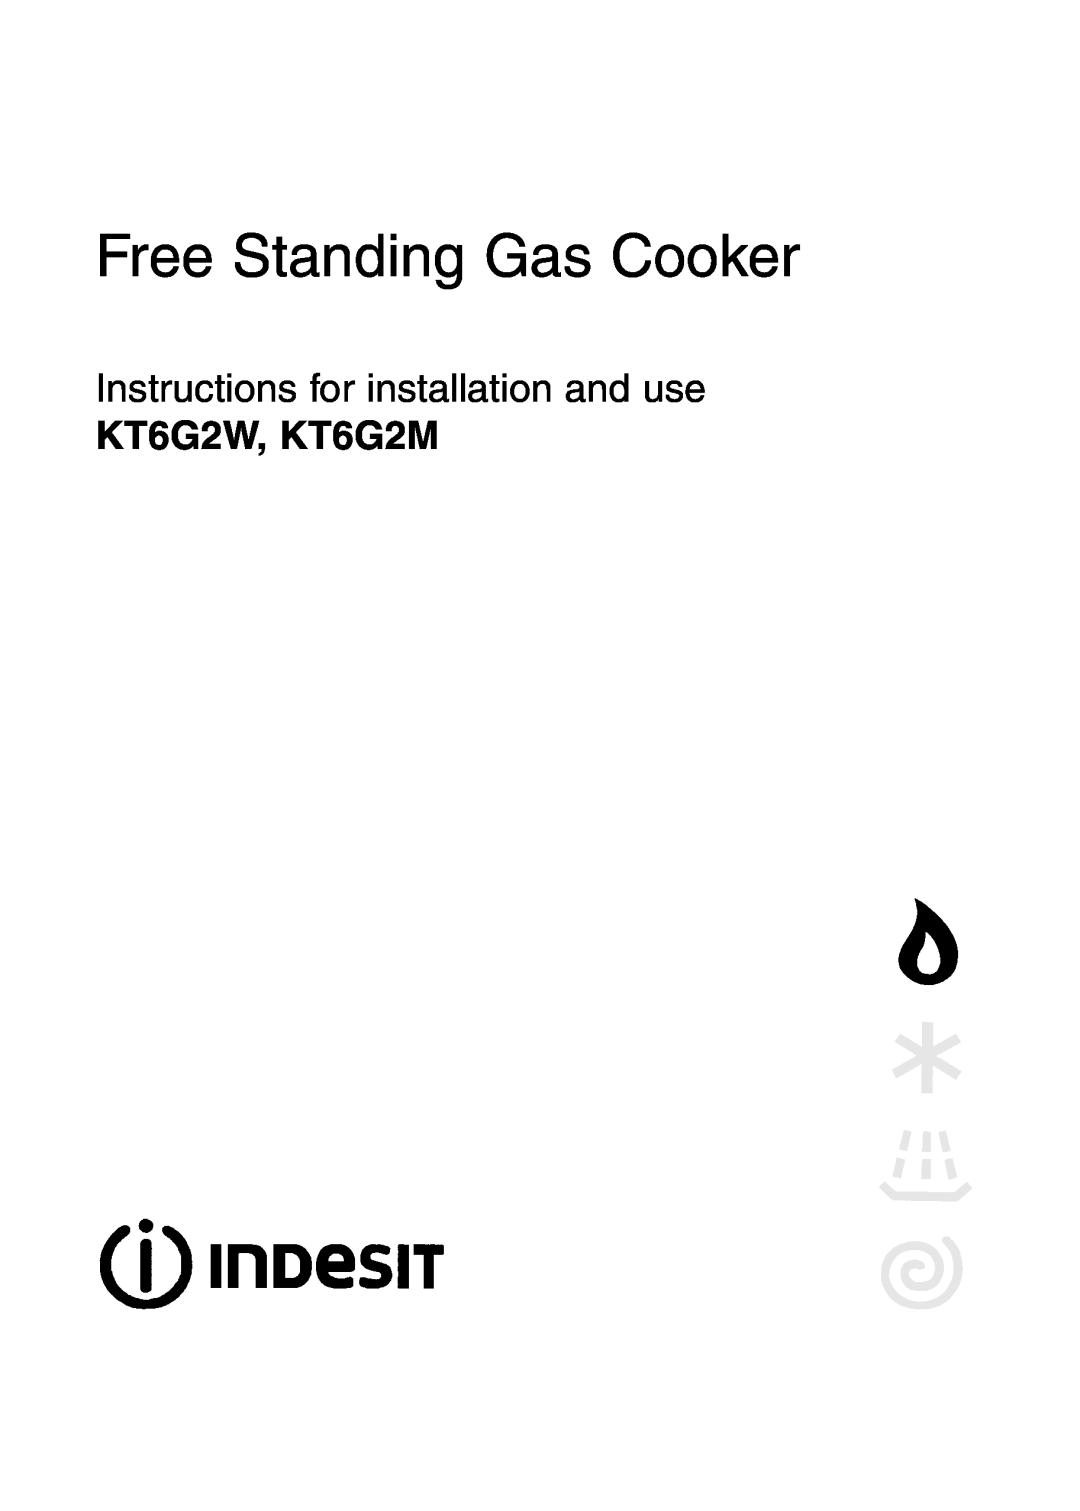 Indesit manual Free Standing Gas Cooker, Instructions for installation and use, KT6G2W, KT6G2M 